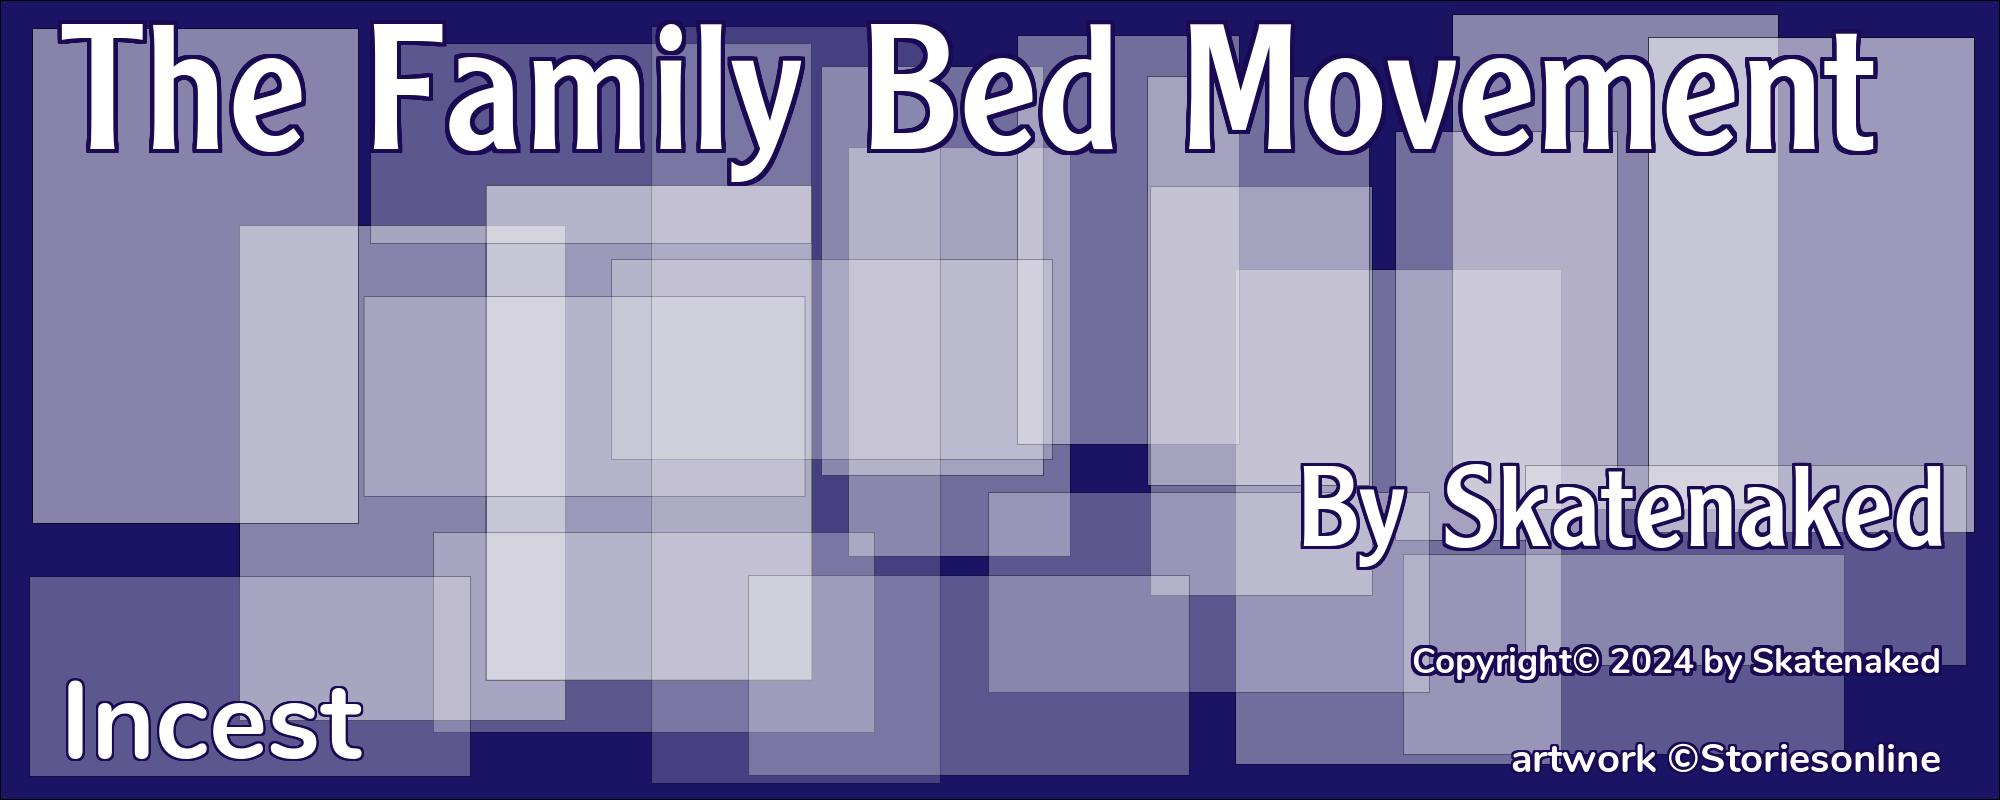 The Family Bed Movement - Cover